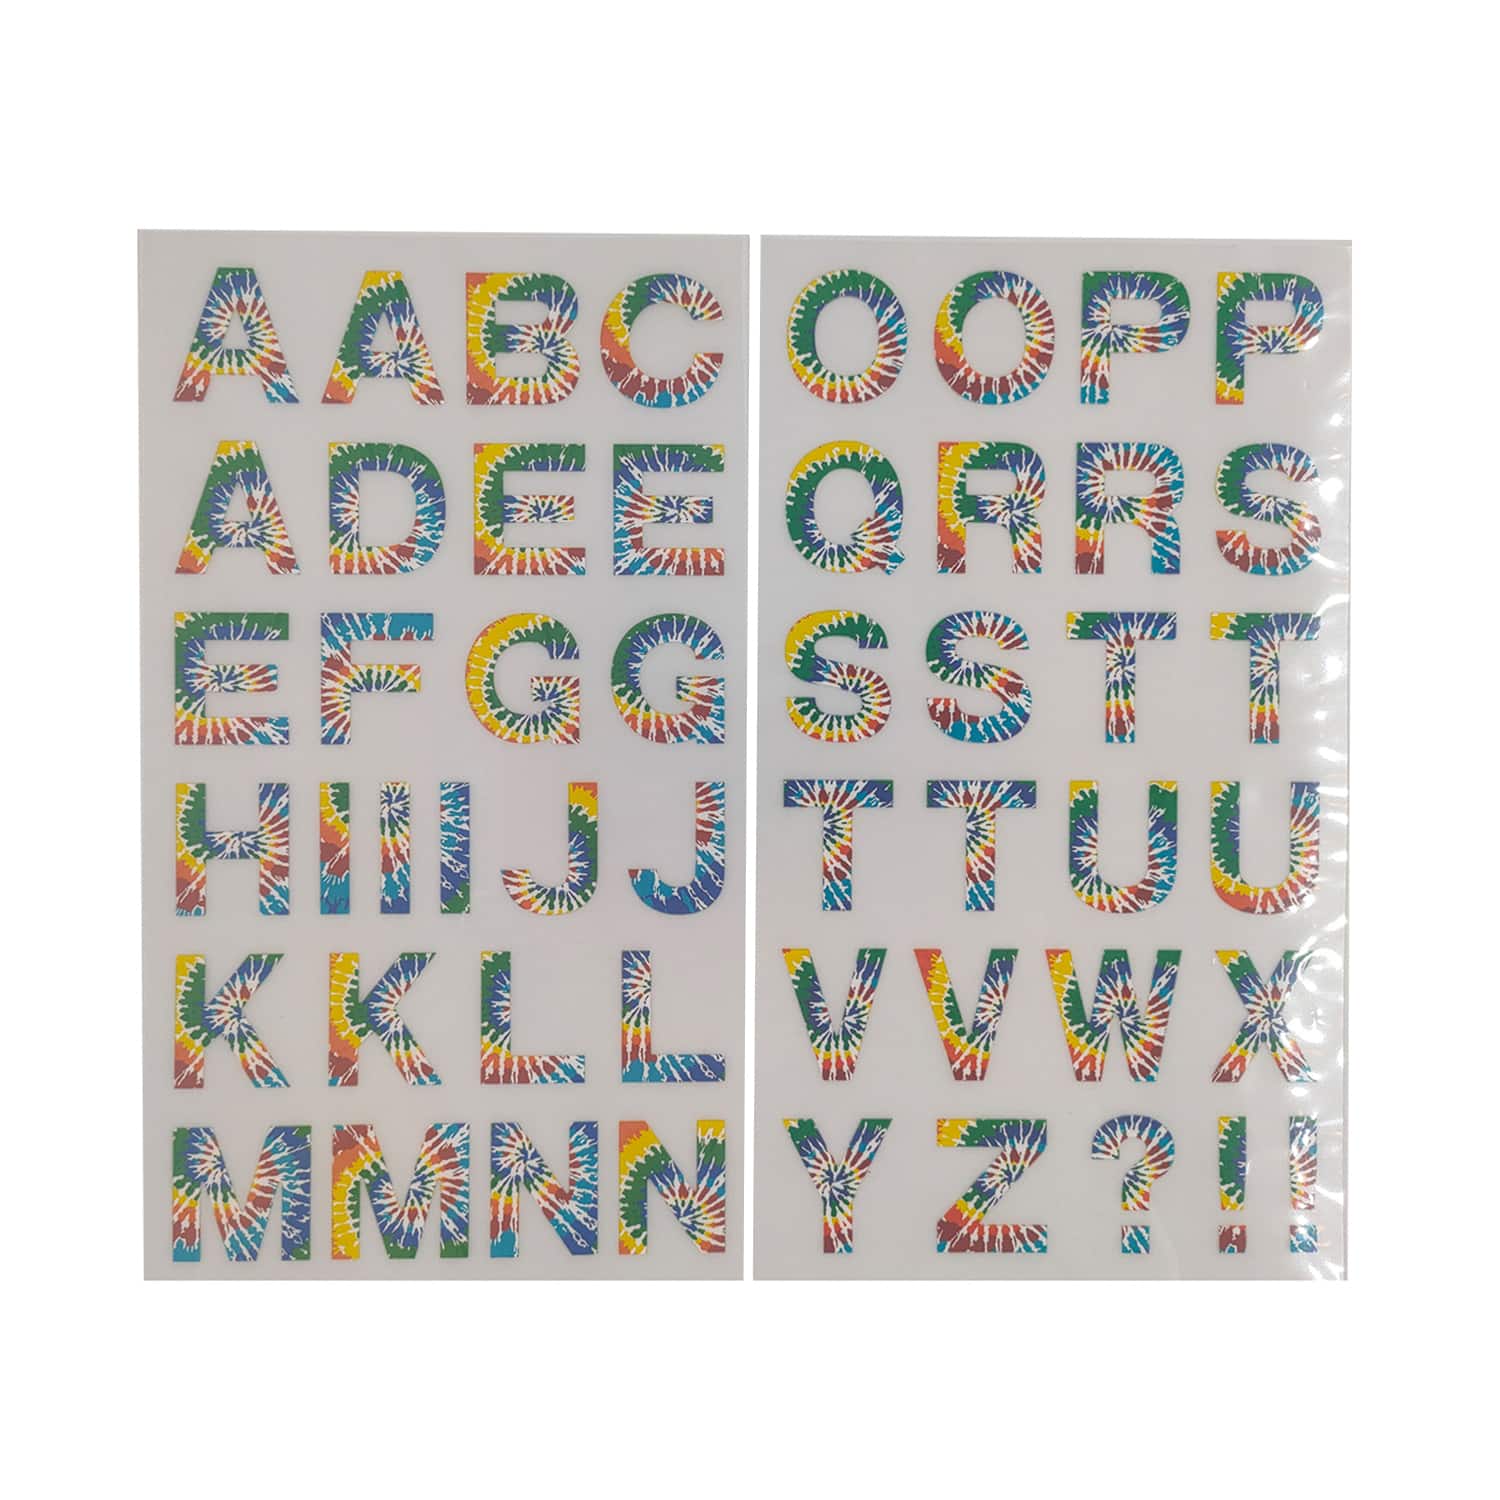 12 Packs: 51 ct. (612 total) 1.25&#x22; Iron-On Tie Dye Rainbow Letters by Make Market&#xAE;